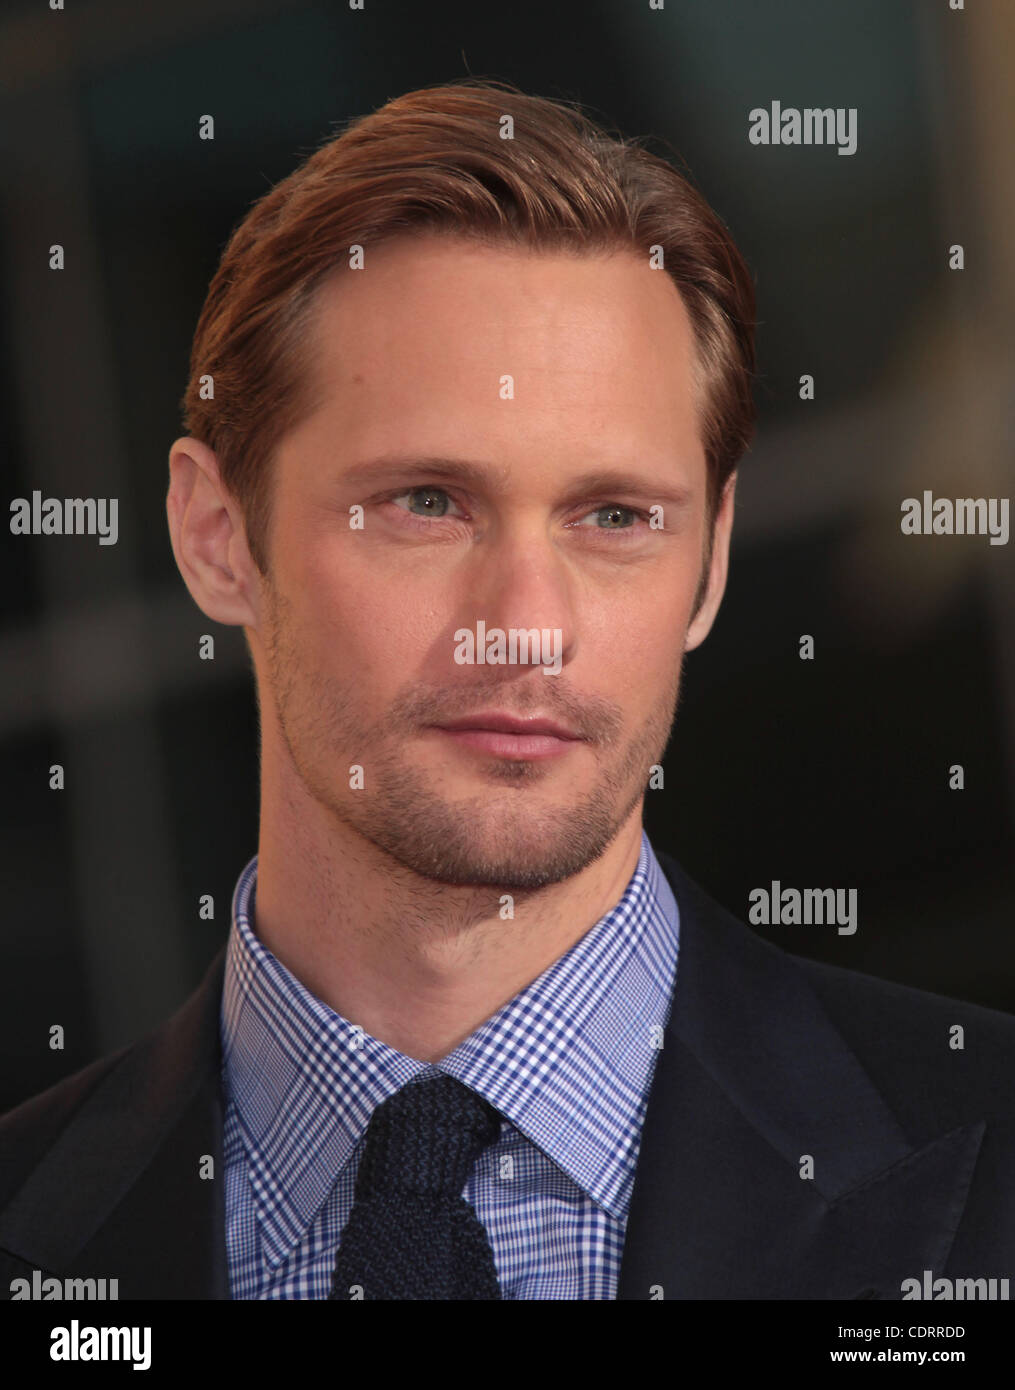 June 21, 2011 - Hollywood, California, U.S. - ALEXANDER SKARSGARD arrives for the premiere of the  'True Blood' at the Cinerama theater. (Credit Image: © Lisa O'Connor/ZUMAPRESS.com) Stock Photo